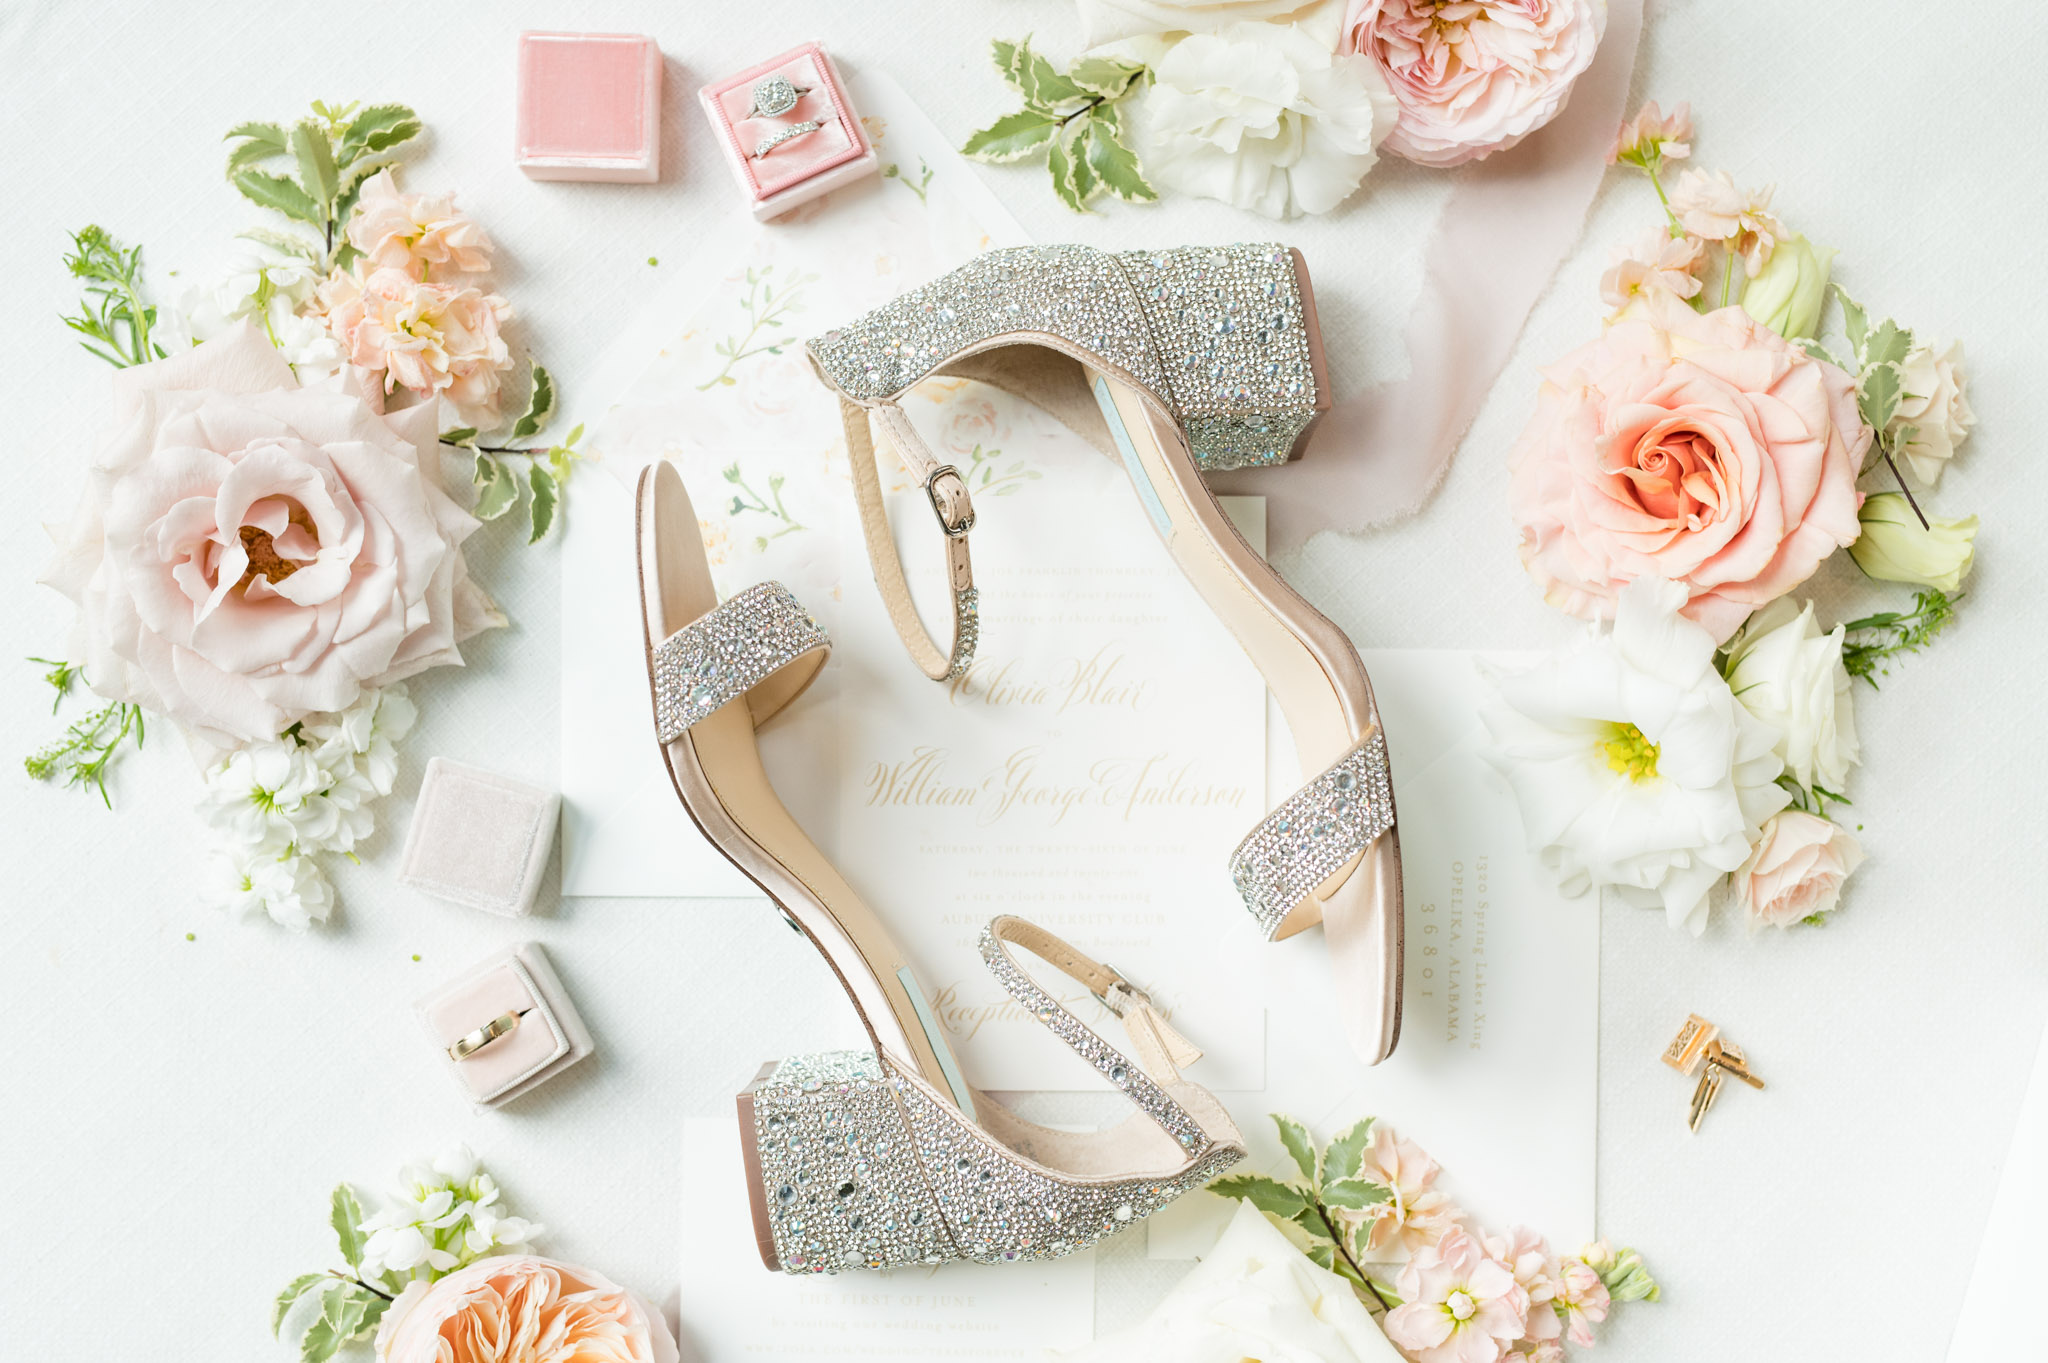 Bride's shoes sit with flowers and rings.